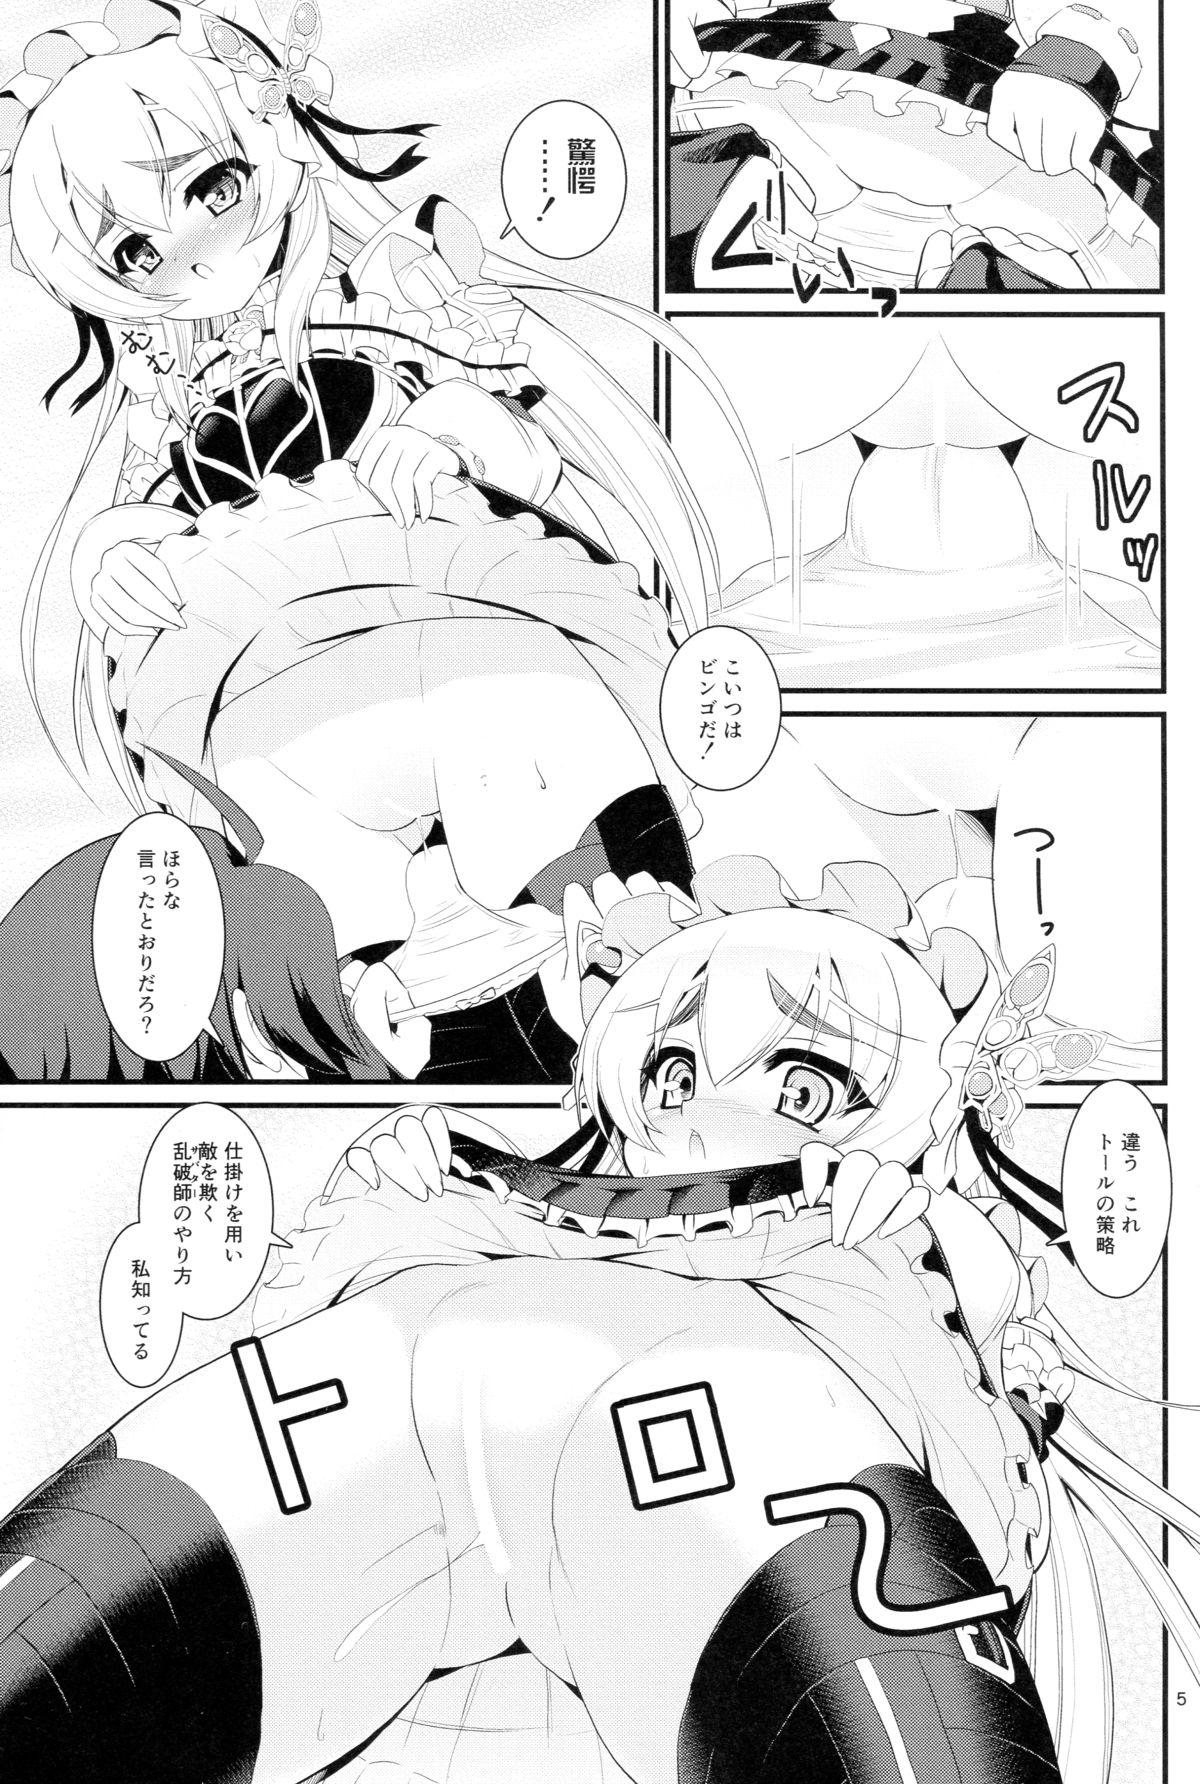 Rola Dig Me No Grave - Hitsugi no chaika Family Roleplay - Page 4